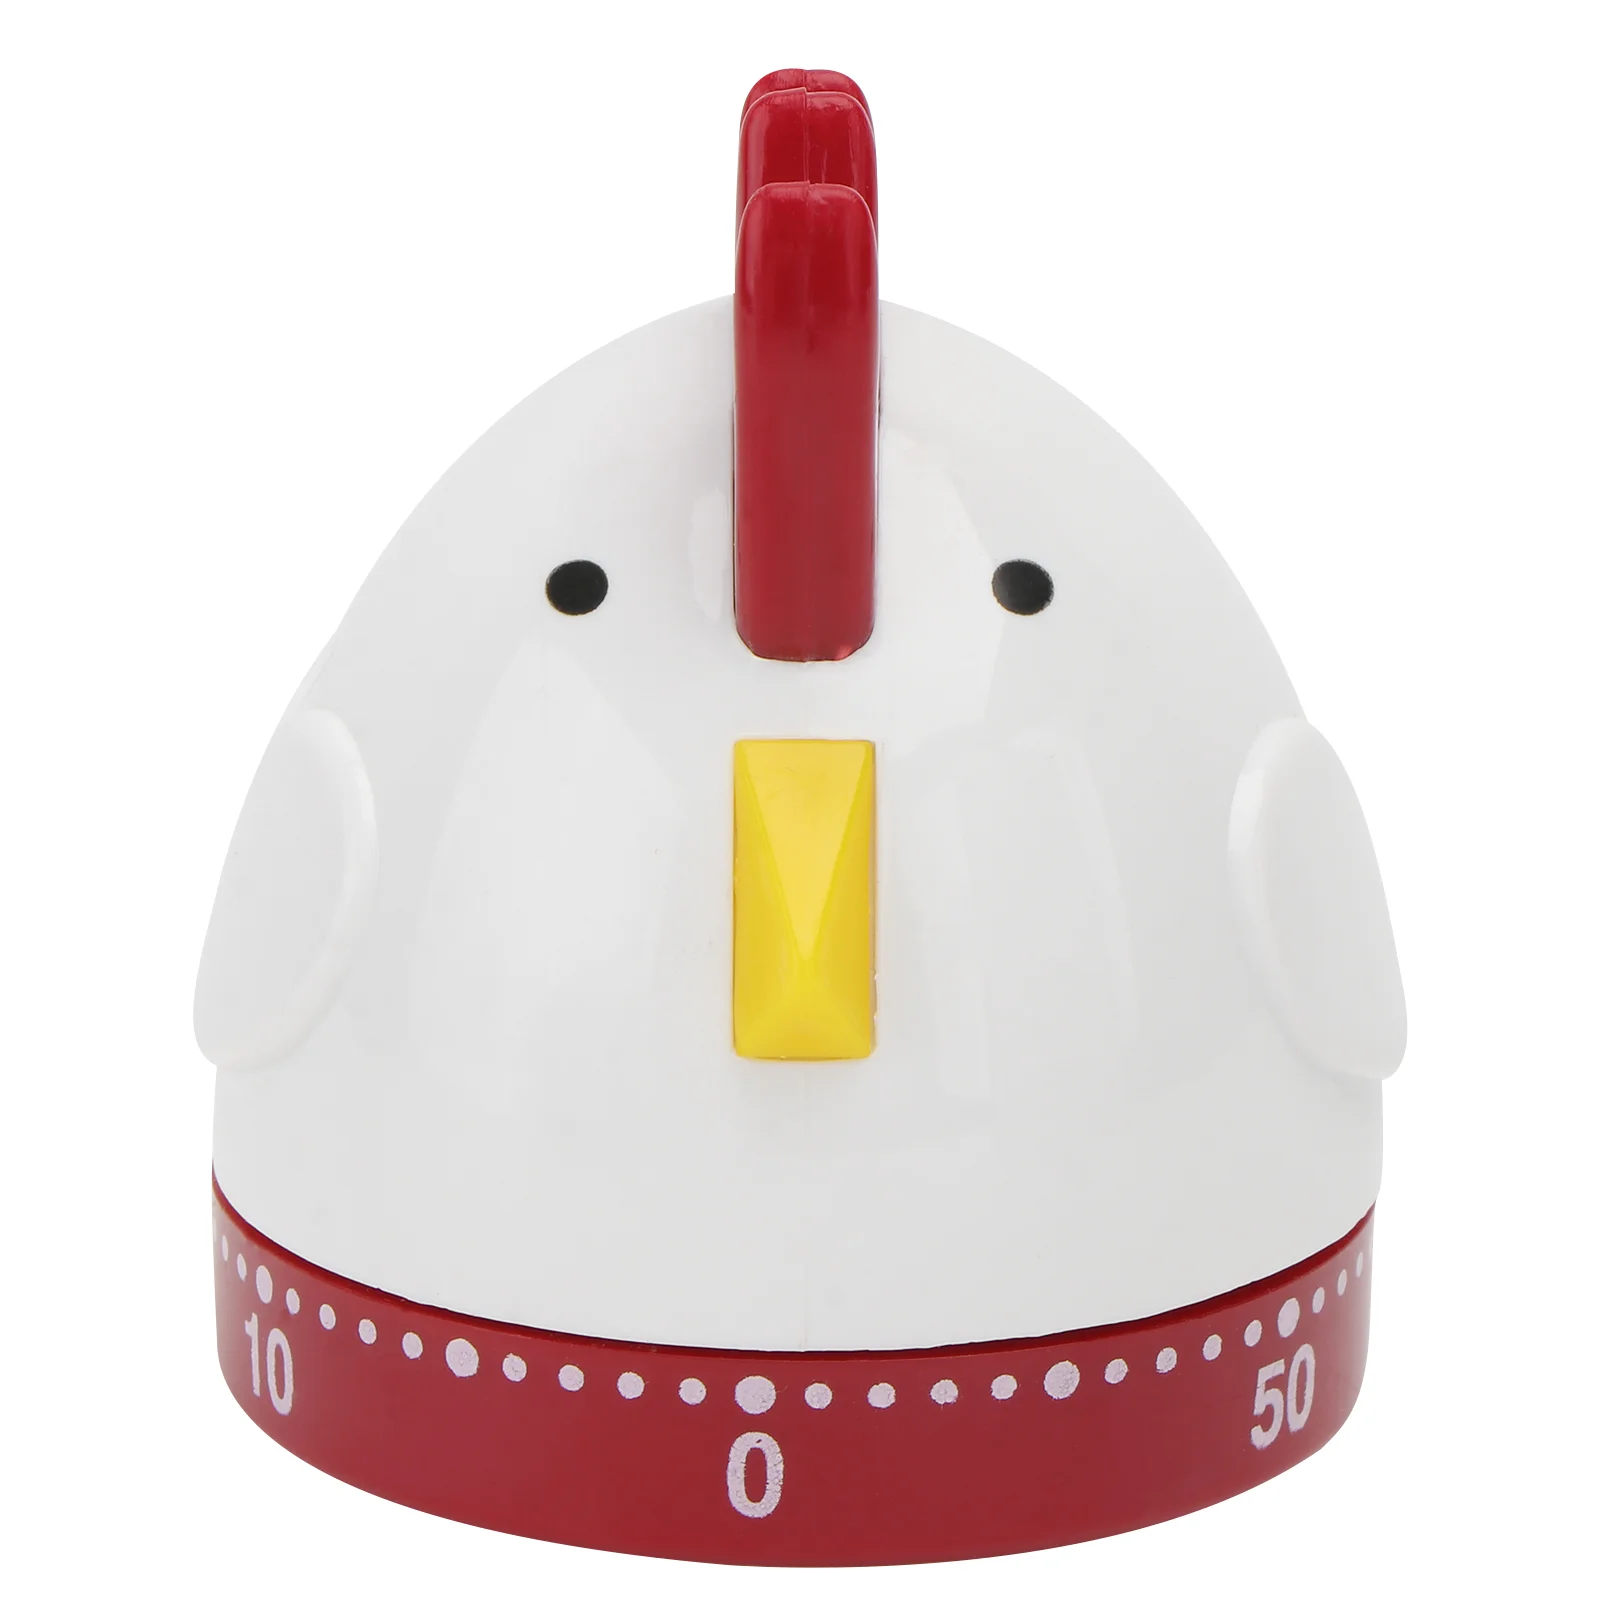 

Cock Timer Countdown Cartoon Rooster Reminder Kids Learning Cooking Timers Desktop Kitchen Mechanical